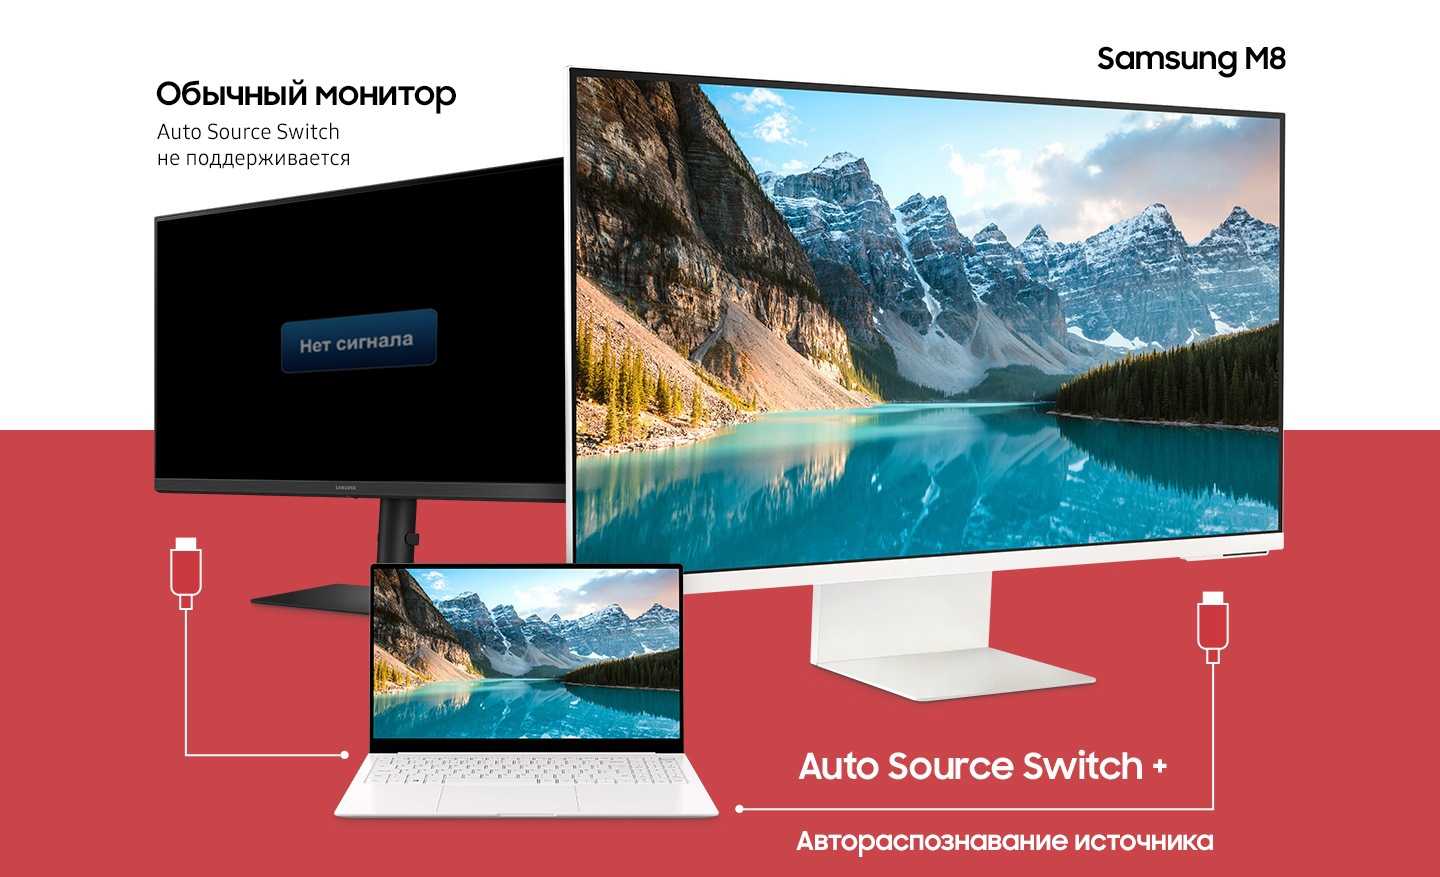 A laptop sits in between two monitors. The laptop has two different cables attempting to connect to the monitors. Above the left monitor, the text "Conventional, Auto Source Switch not supported" appears and a "No Signal" icon appears on the screen. Above the right monitor shows the text "Samsung M8" and a mountainous scene appears on the screen due to the Auto Source Switch+ functionality.